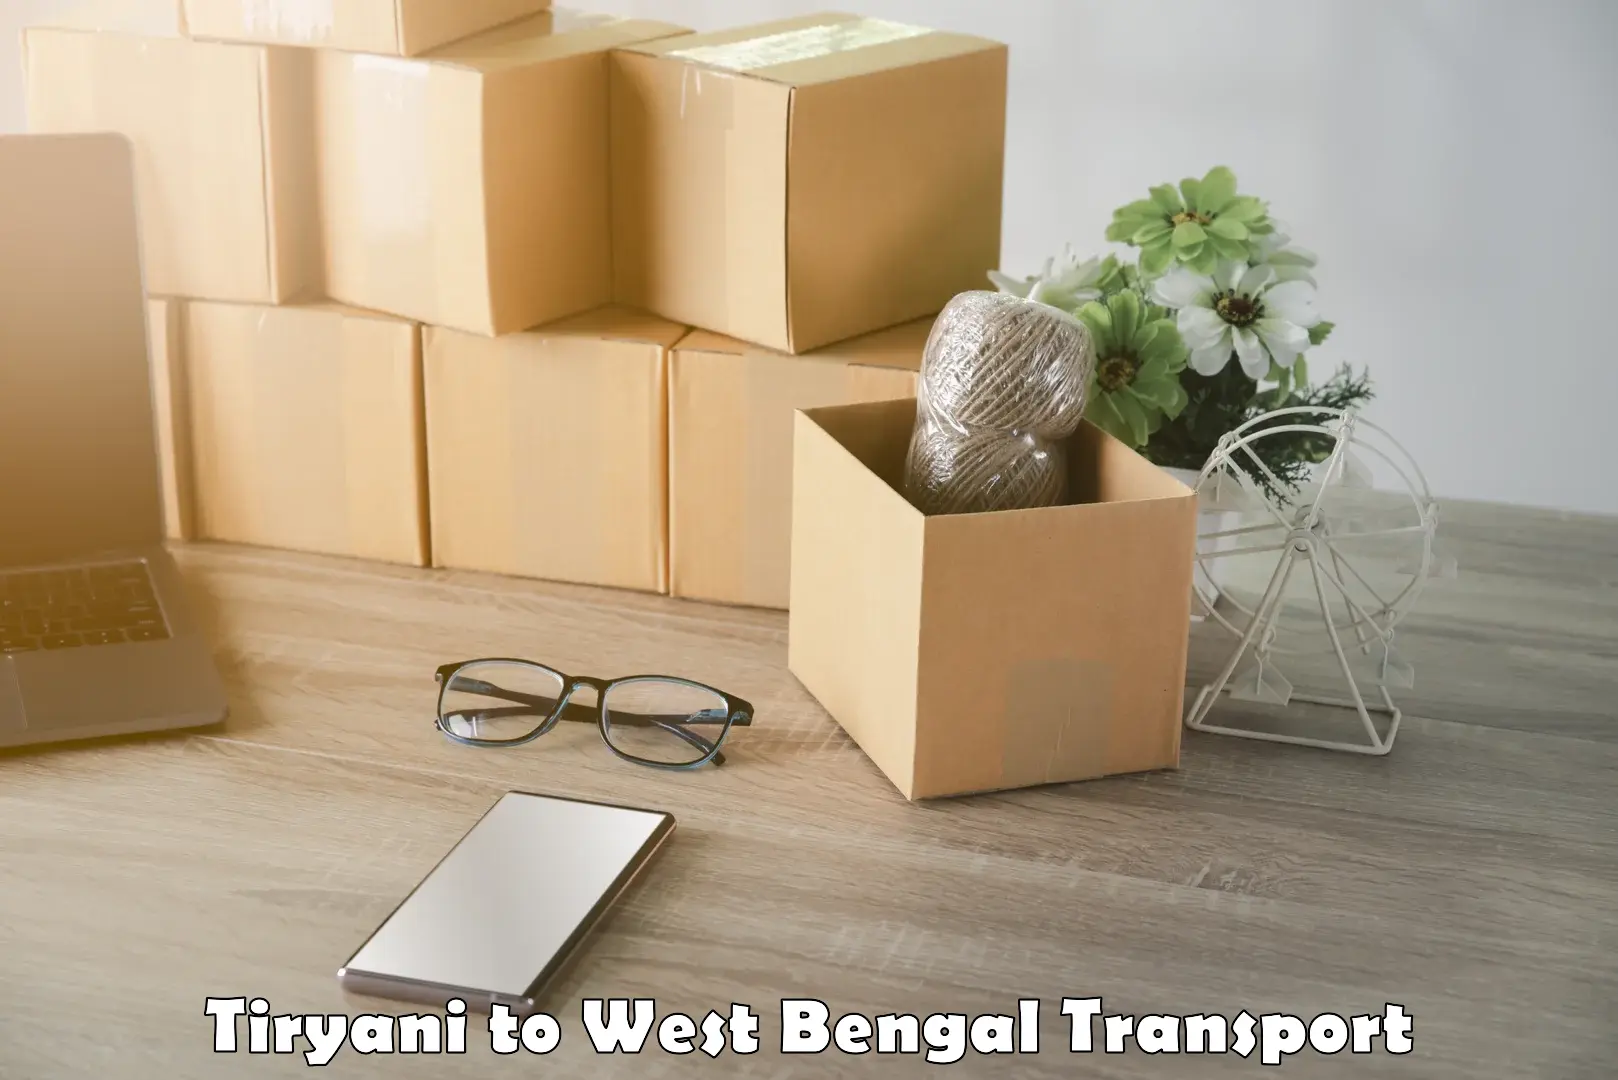 Daily transport service Tiryani to West Bengal